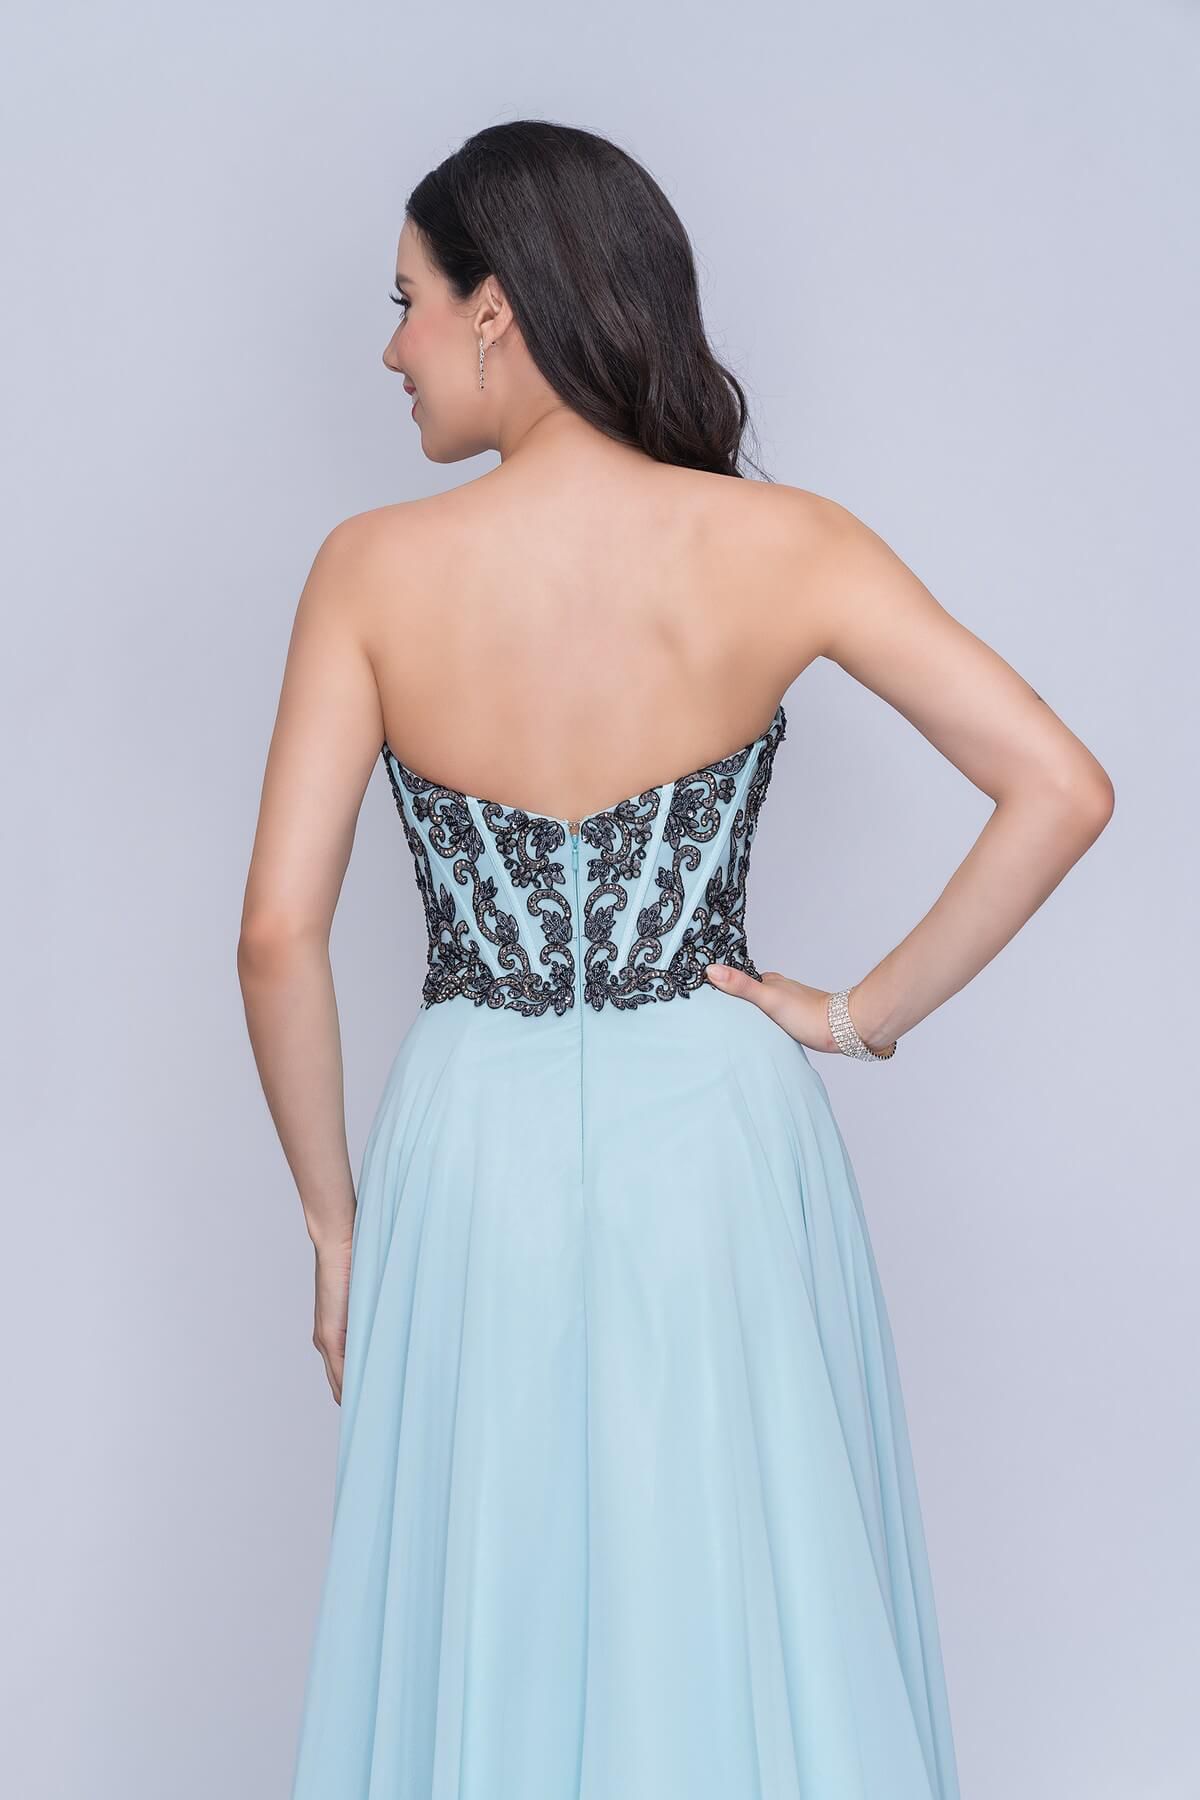 Style 3140 Nina Canacci Size 2 Prom Strapless Light Blue A-line Dress on Queenly